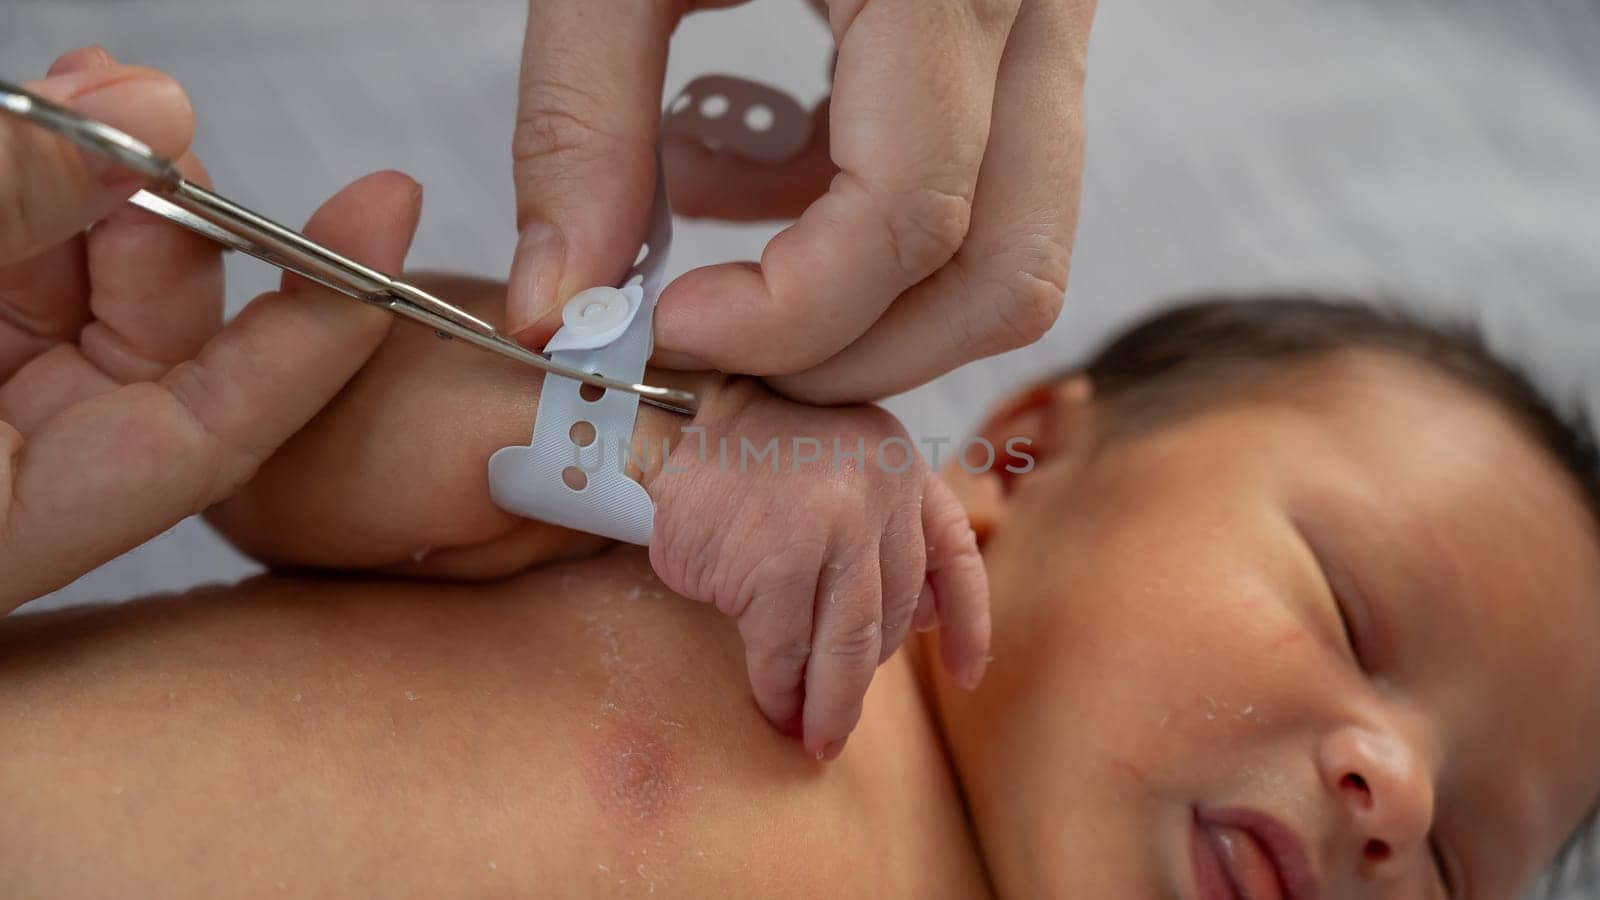 A woman cuts a tag from a newborn boy's hand with nail scissors. Close-up of hands